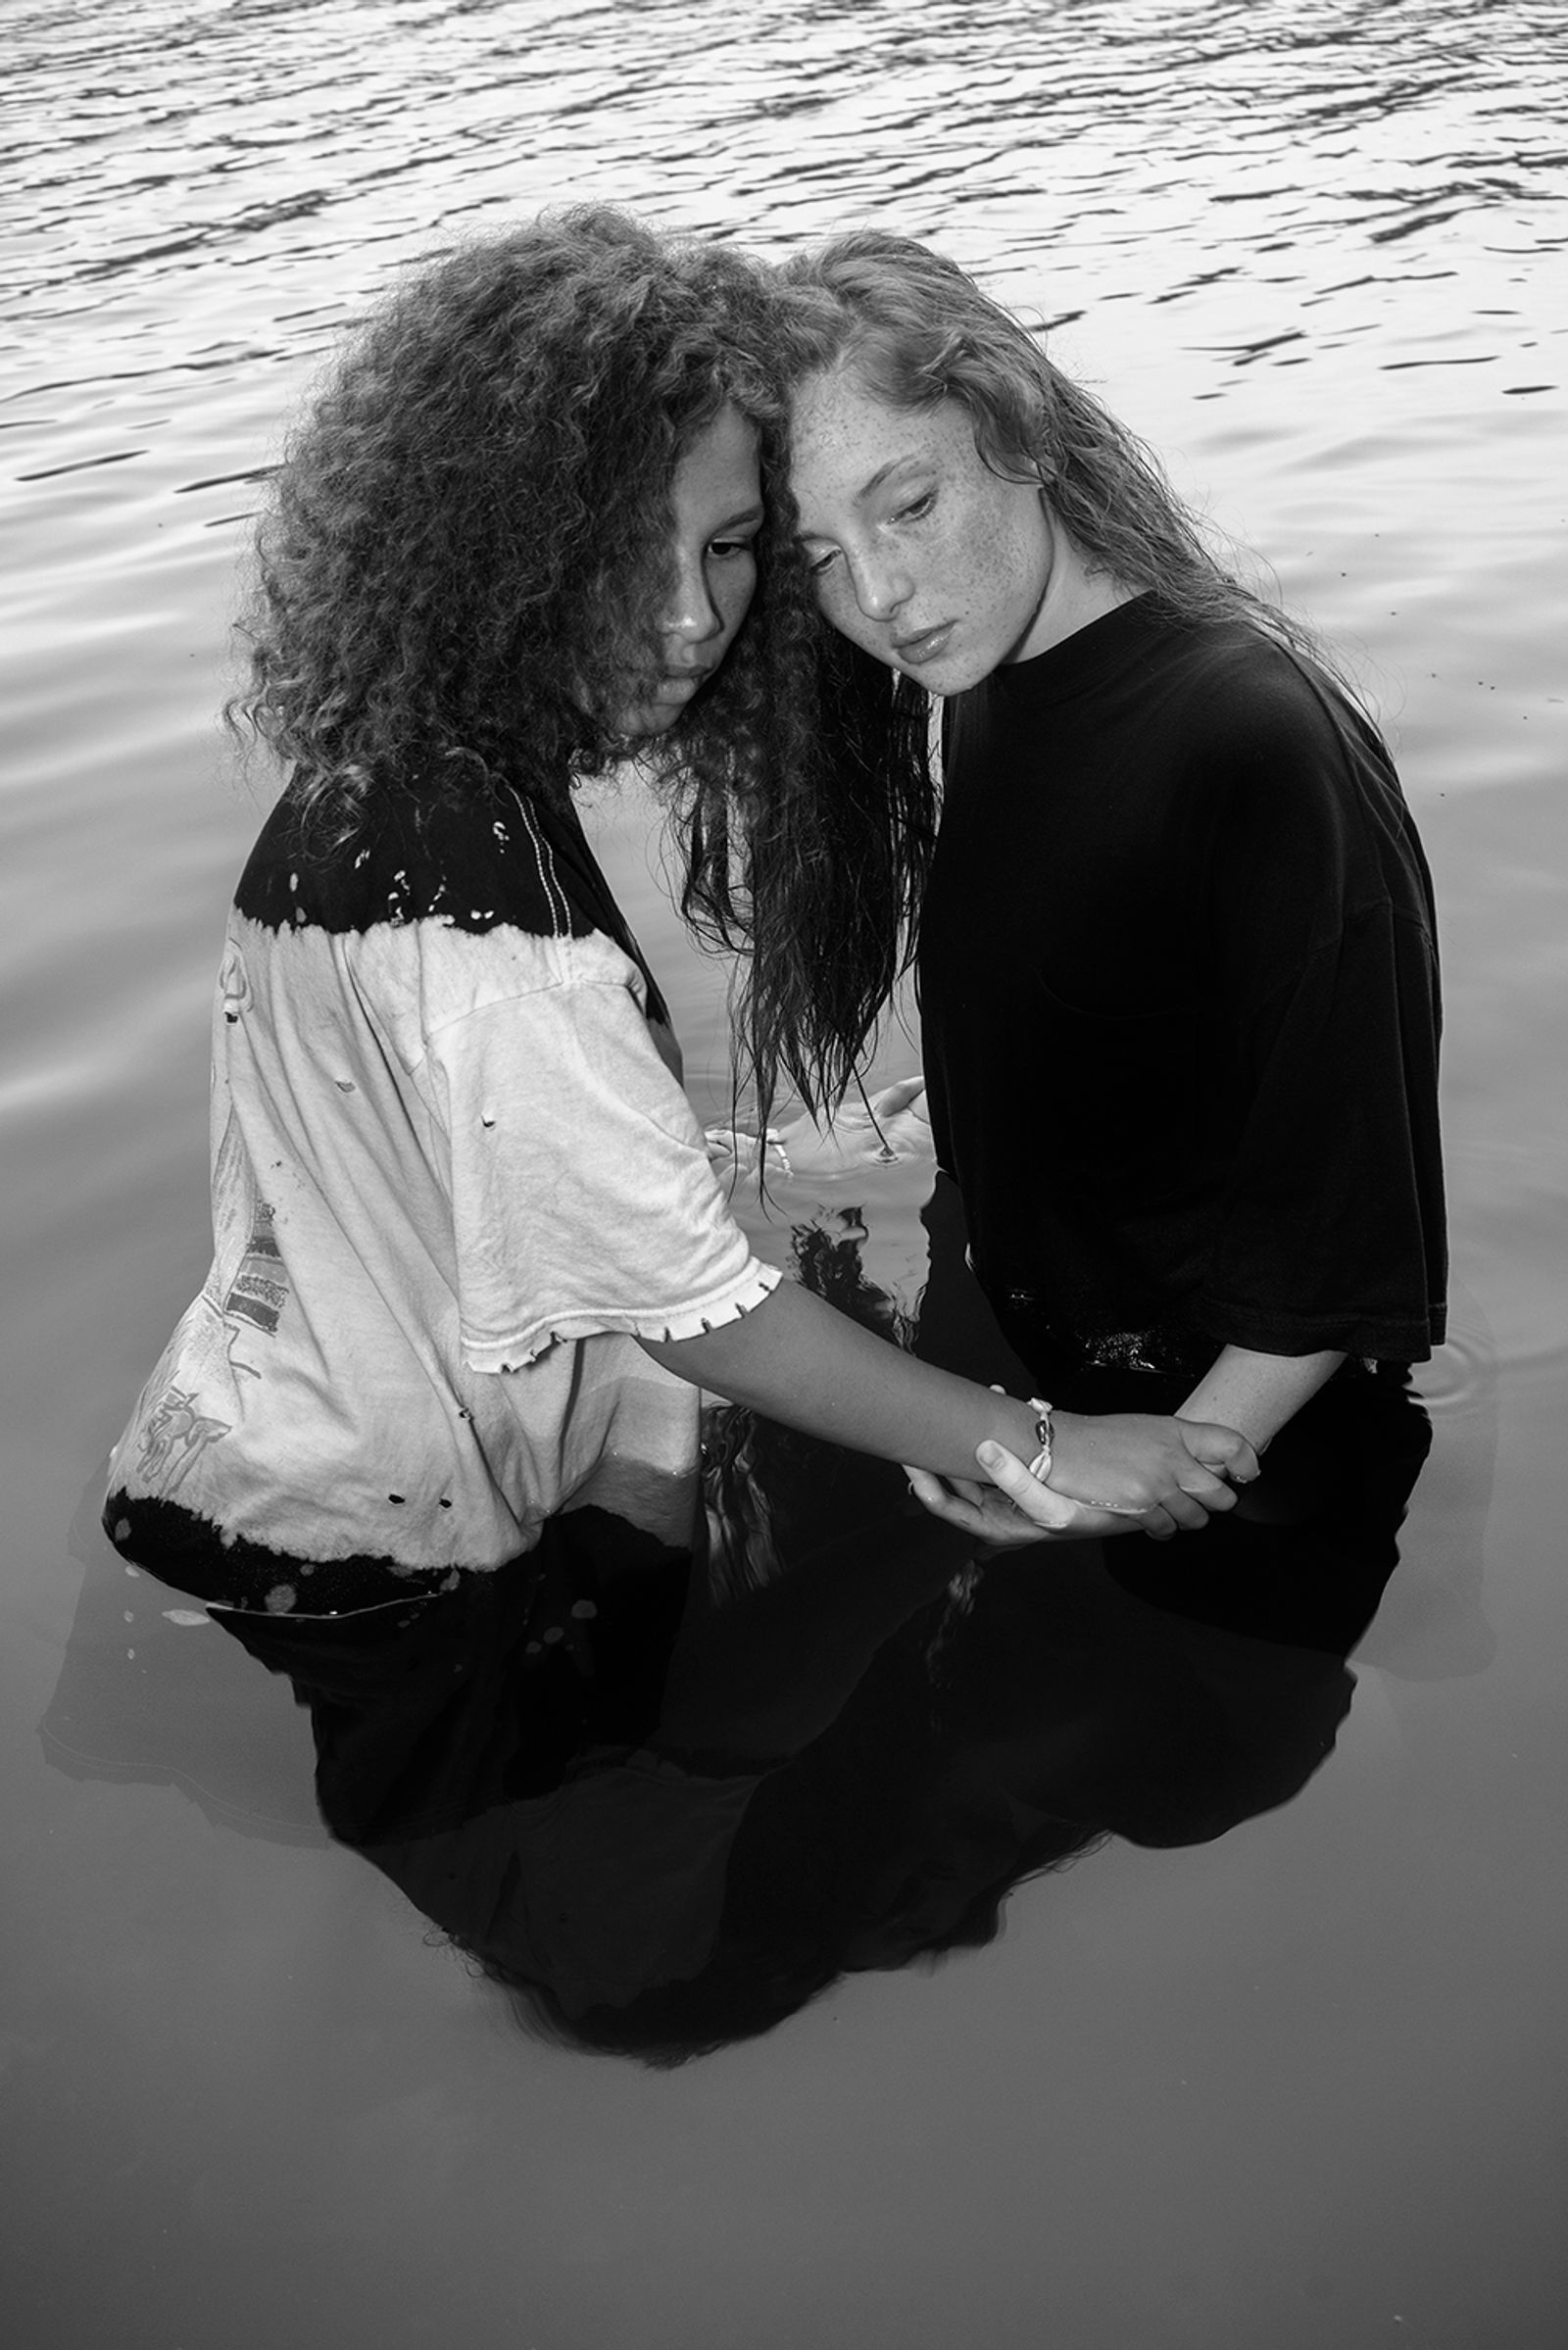 © Jillian Freyer - Aiyanna and Elizabeth embrace one another in the river